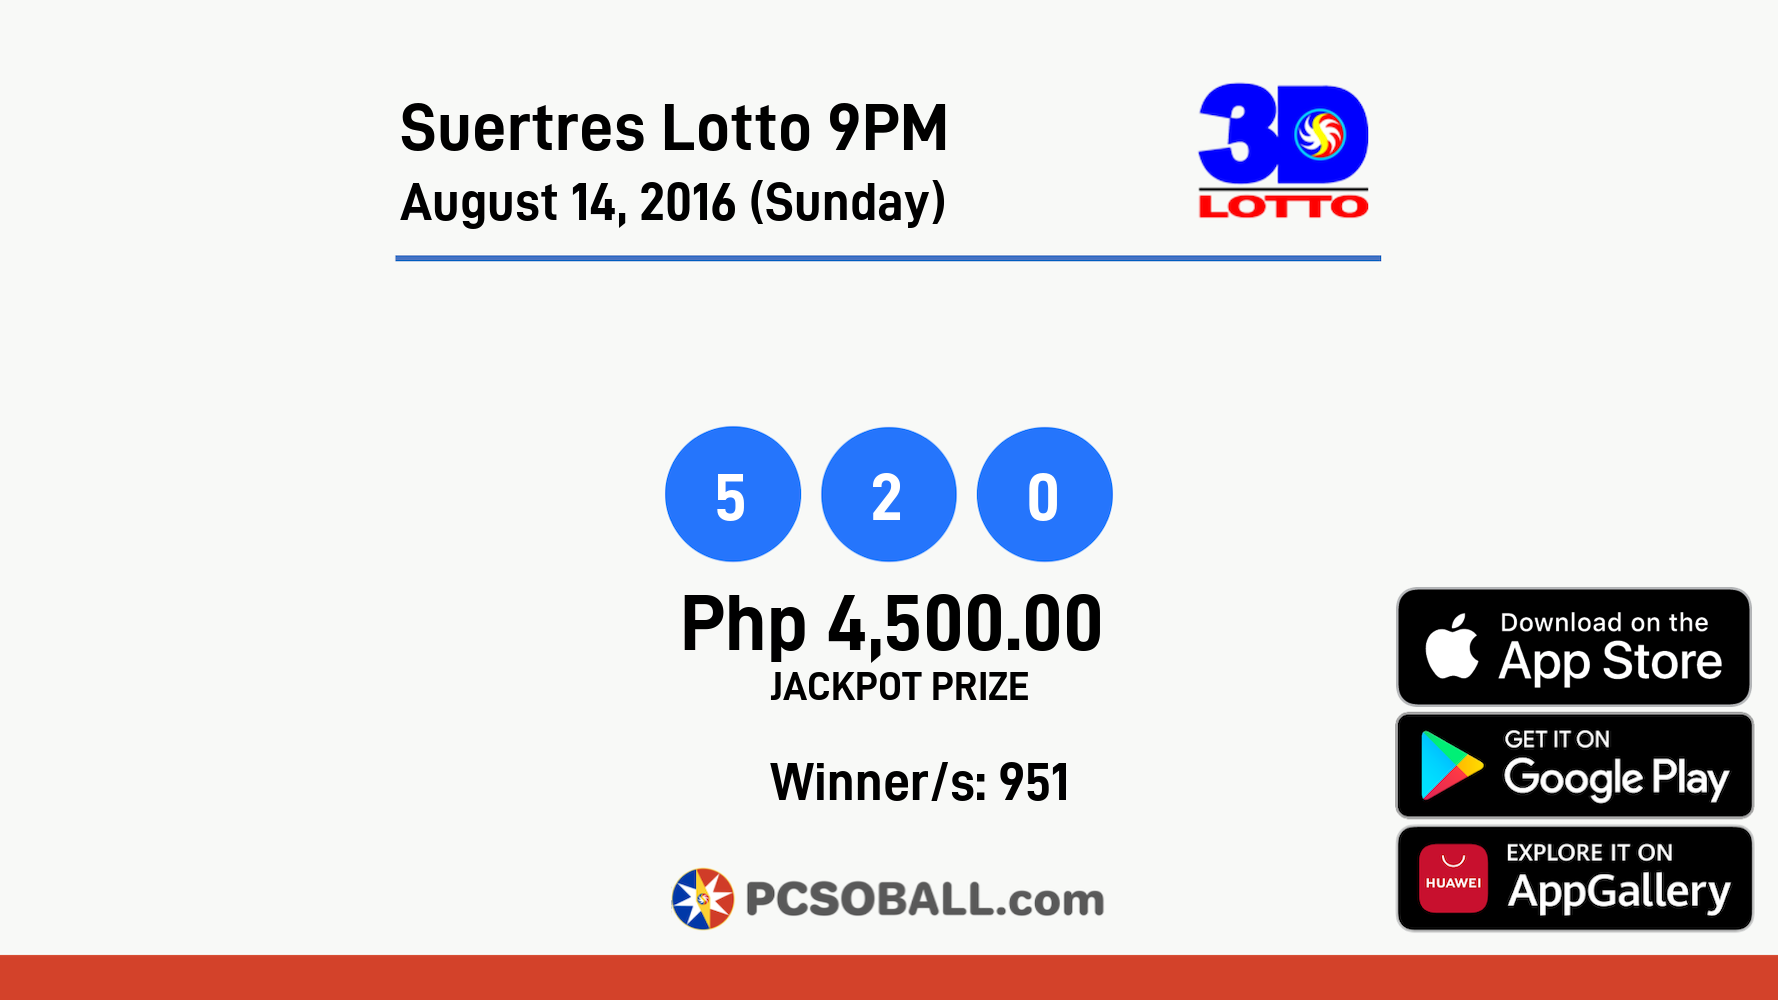 Suertres Lotto 9PM August 14, 2016 (Sunday) Result